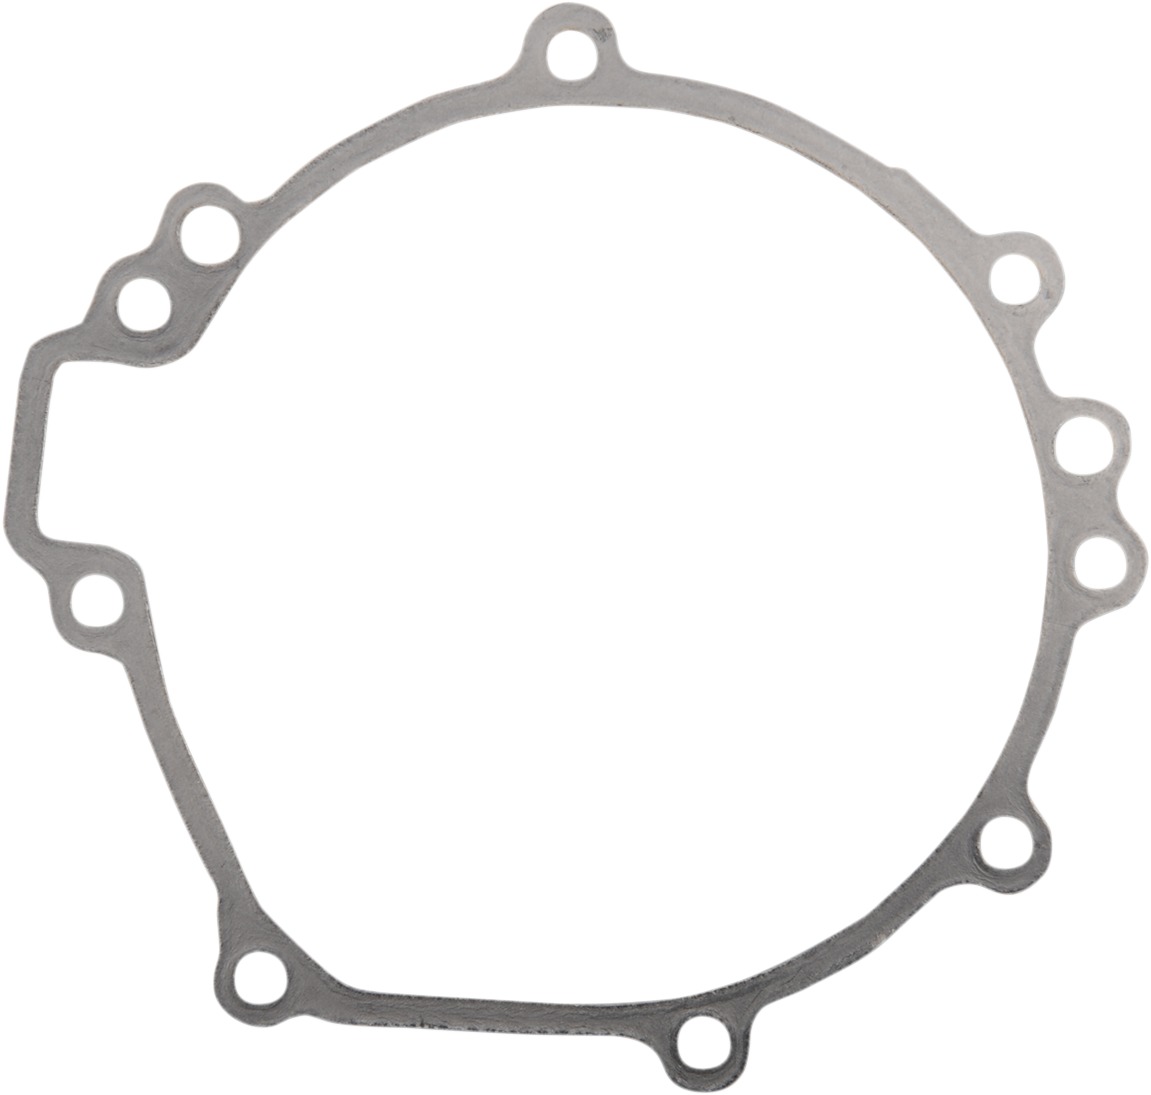 Stator Cover Gasket - For 06-10 Kawasaki ZX10R - Click Image to Close